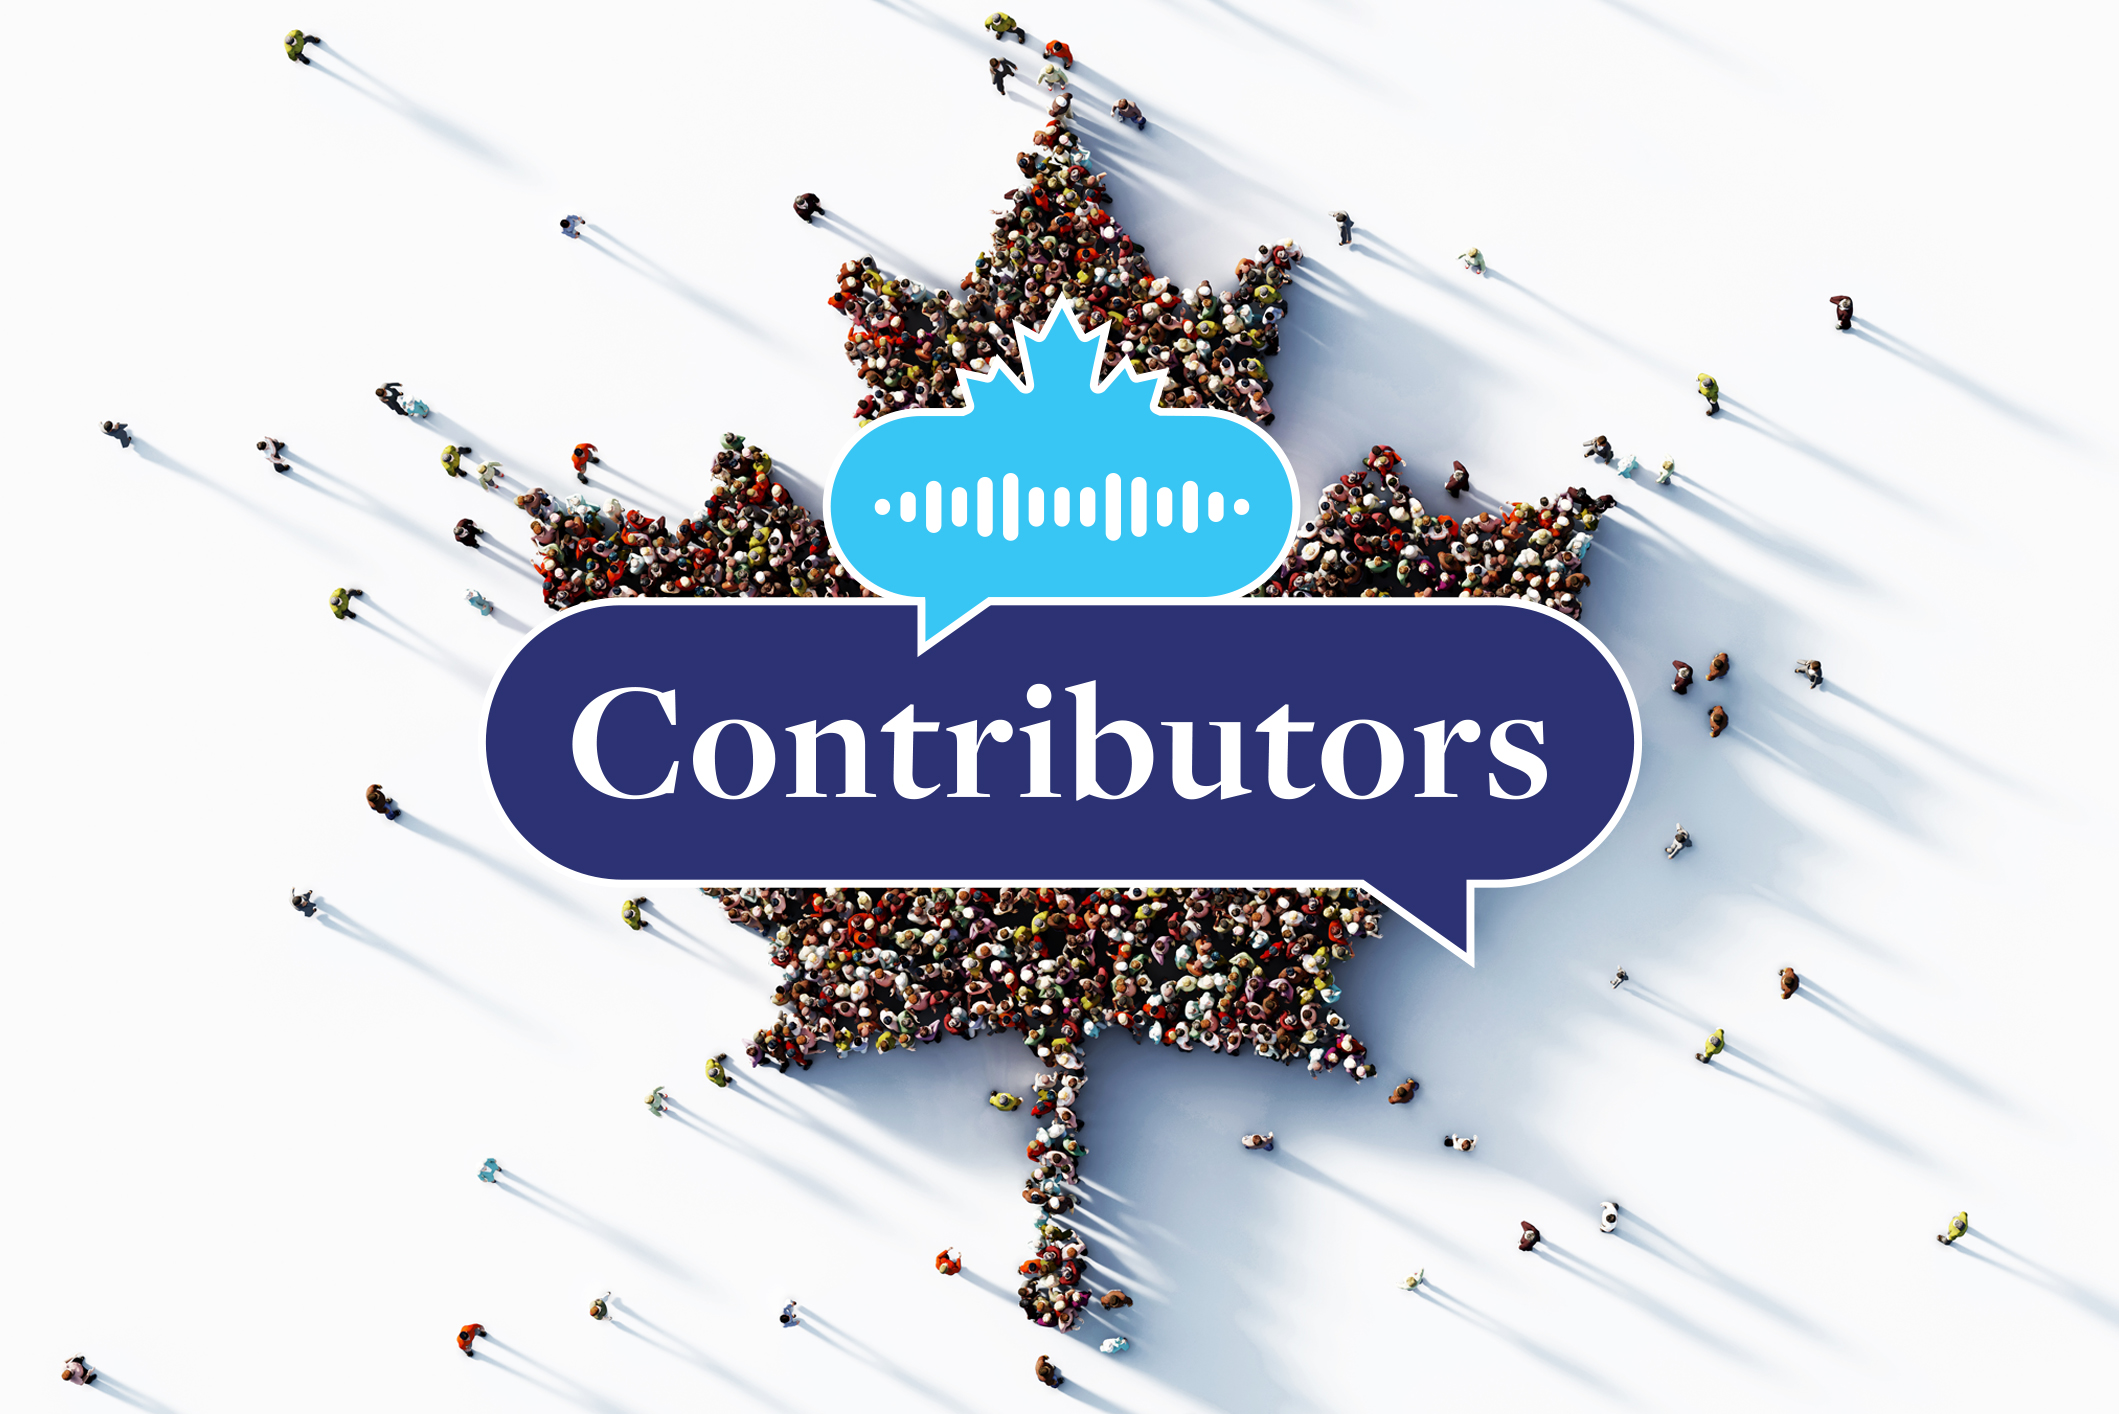 Contributors cover art - people coming together to form a maple leaf